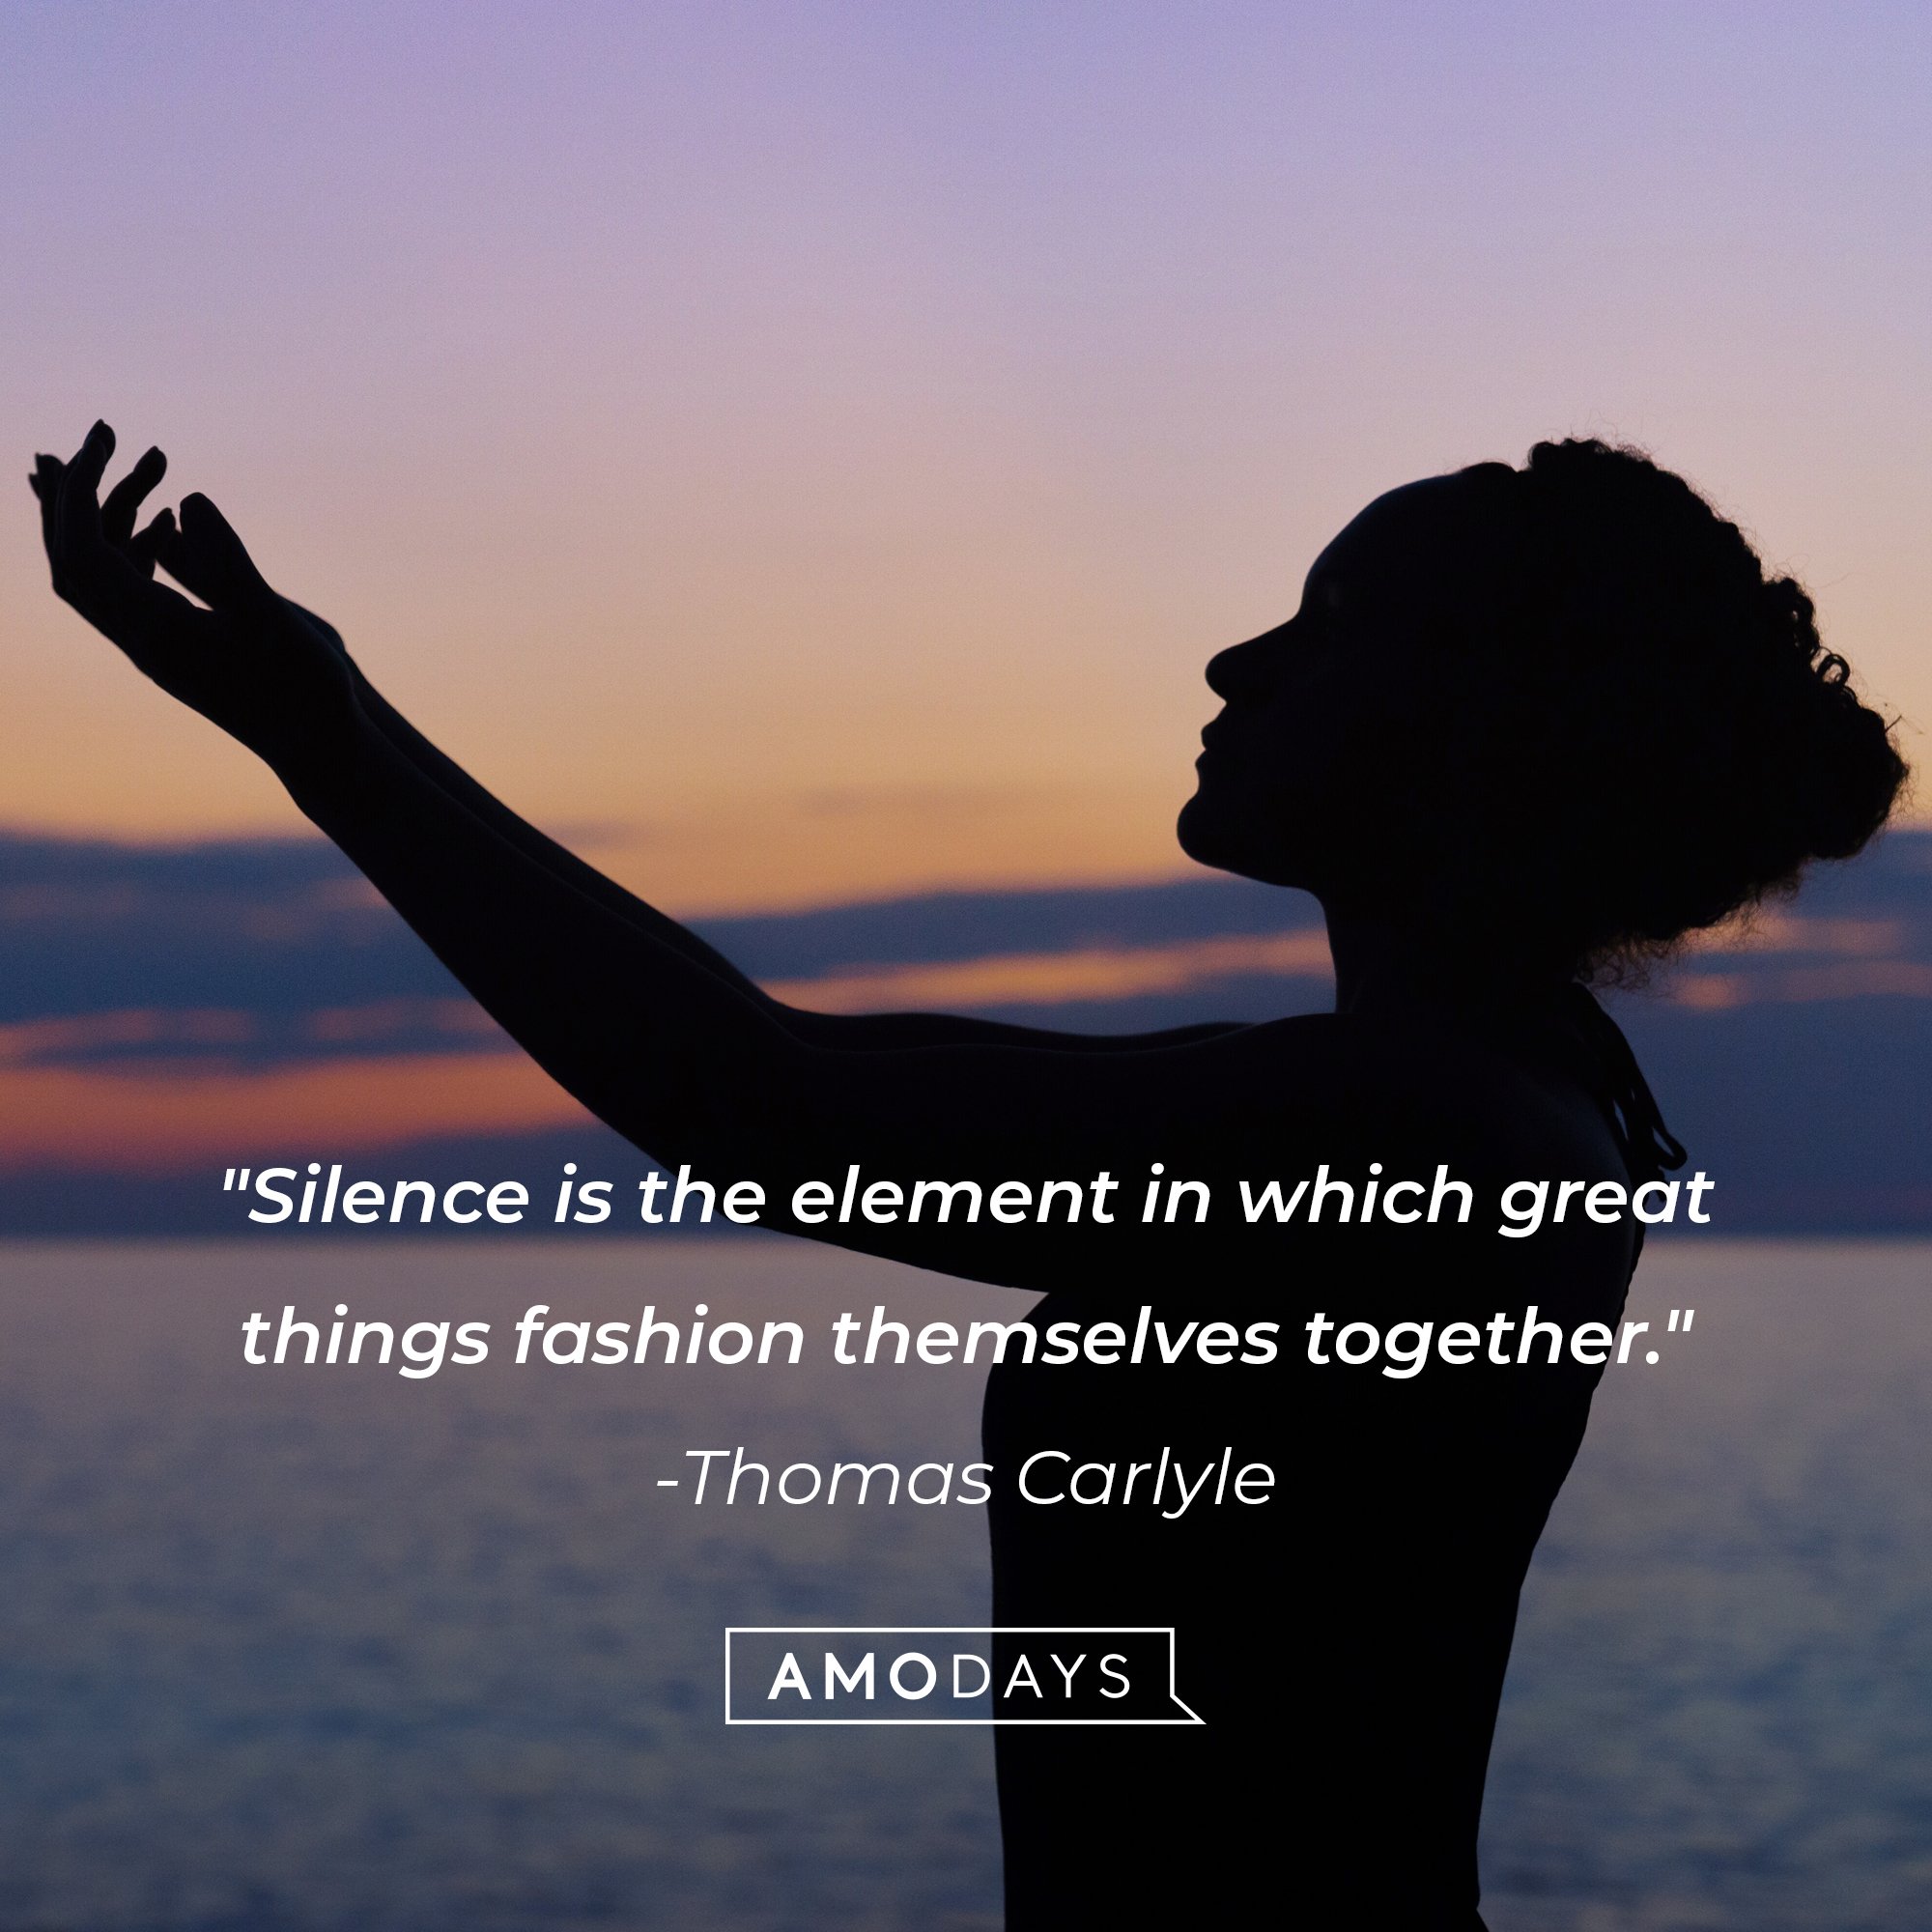 Thomas Carlyle’s quote: "Silence is the element in which great things fashion themselves together." | Image: AmoDays